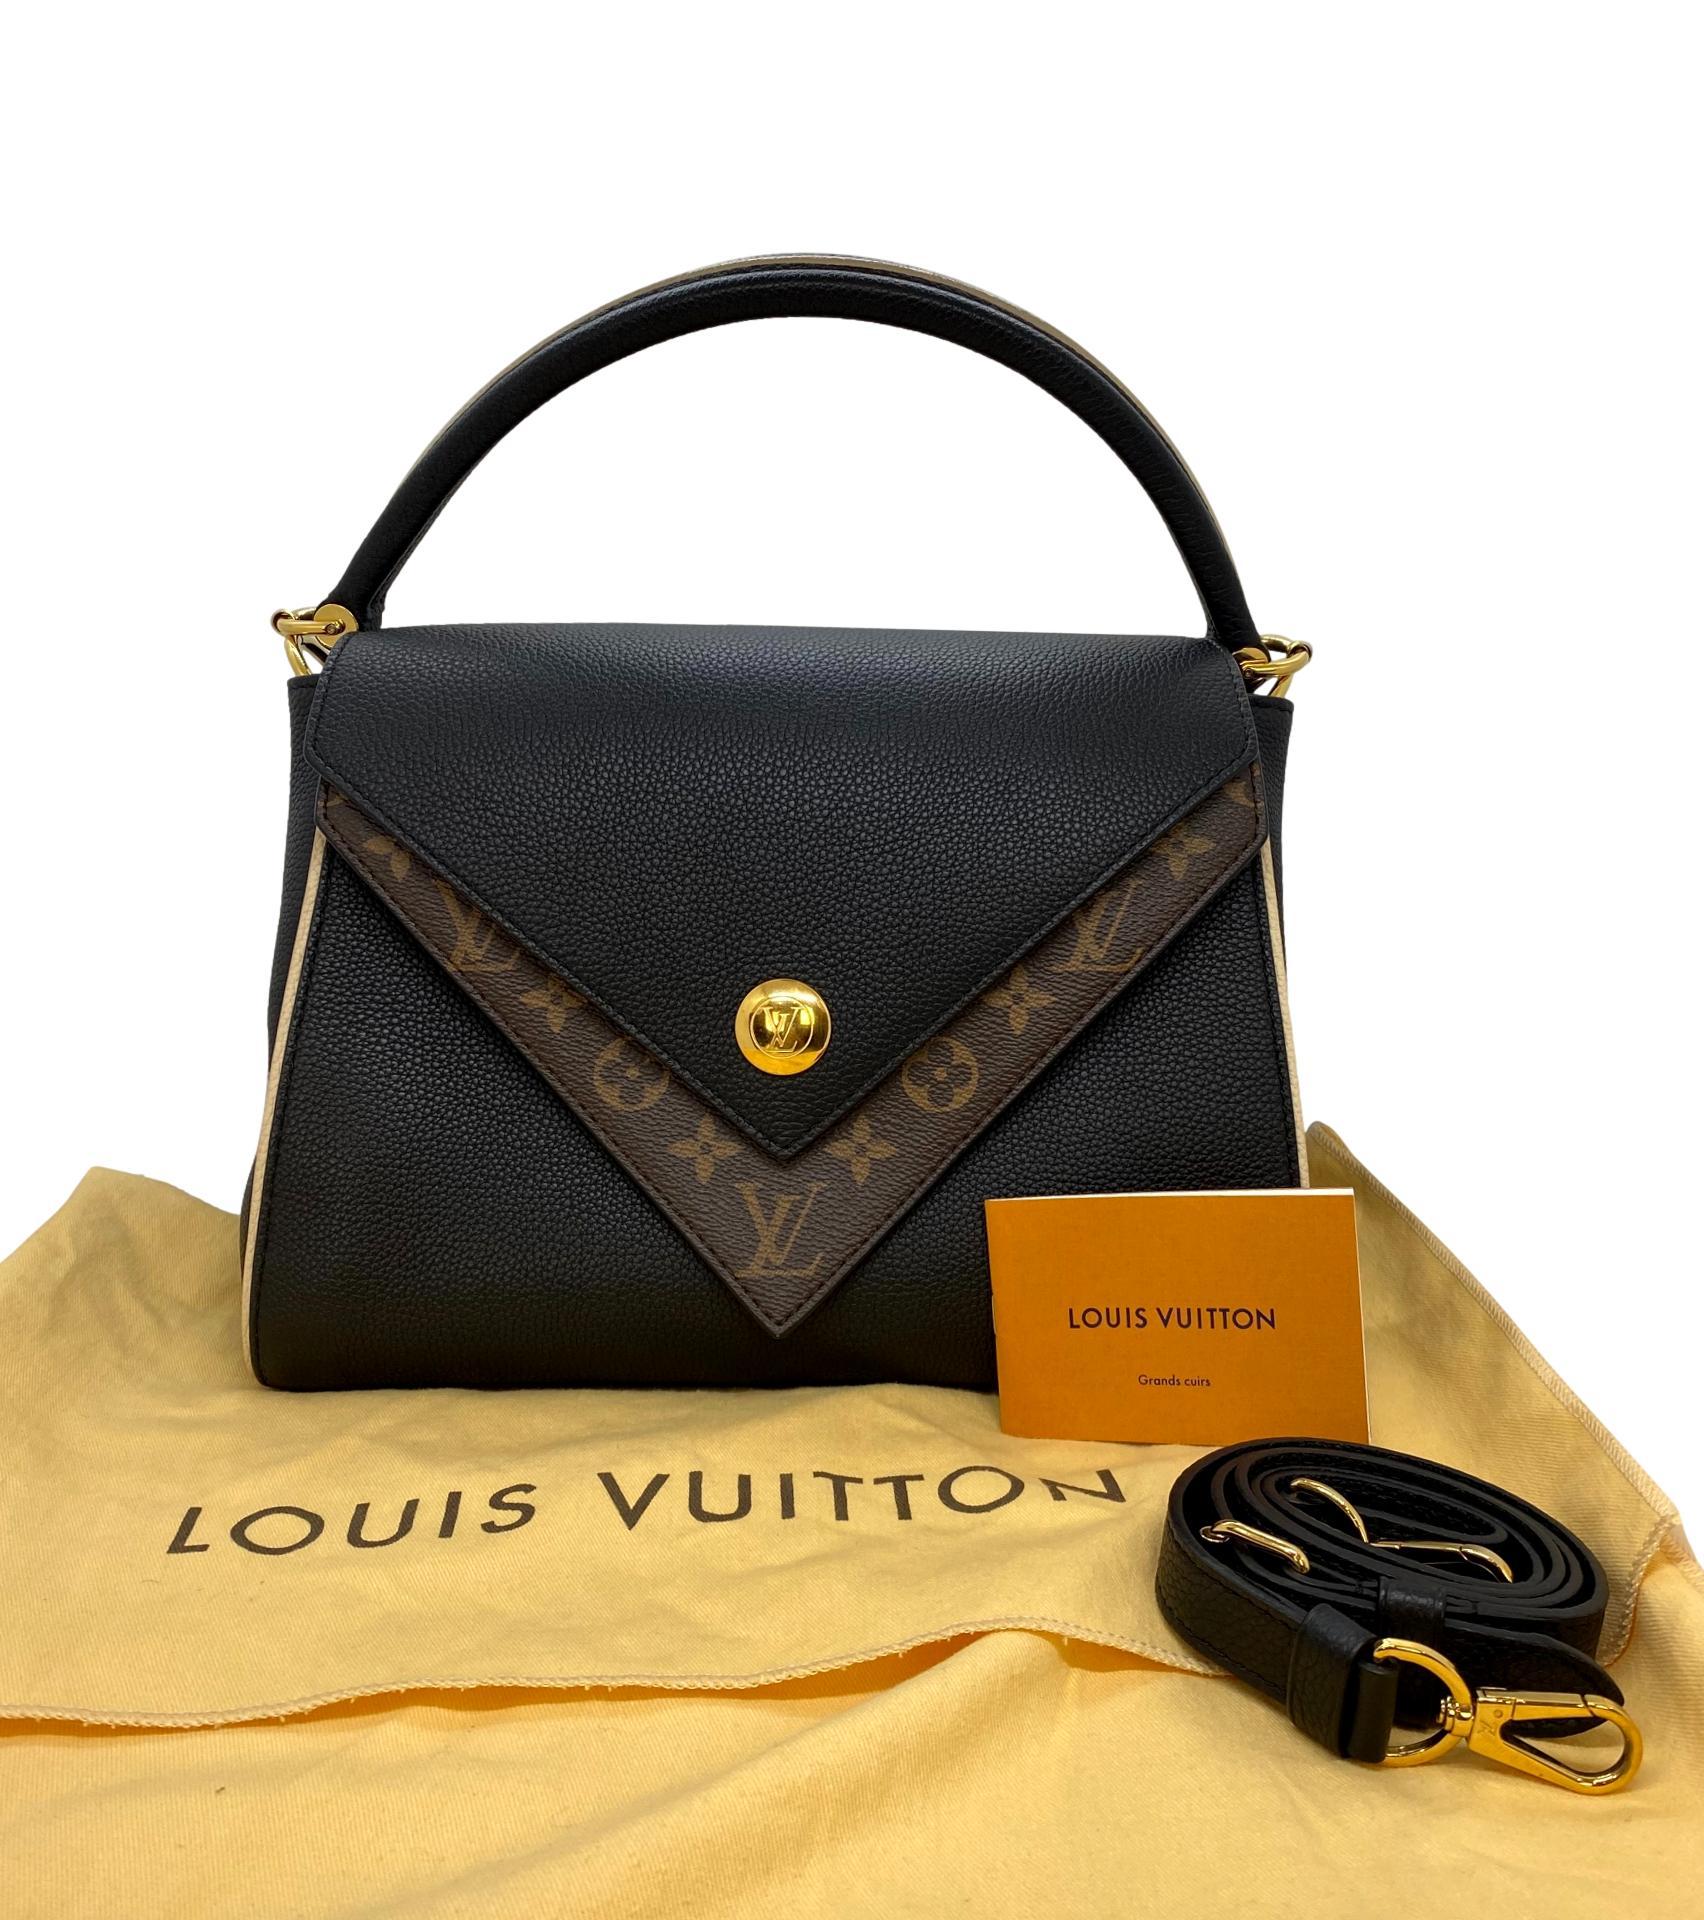 Louis Vuitton Monogram Leather Double V Crossbody Shoulder Bag with Charm, circa 2018. The Louis Vuitton bag is a classic closet staple, first introduced and inspired by the architect of the Art Deco era of the early 1930's. This extremely rare and